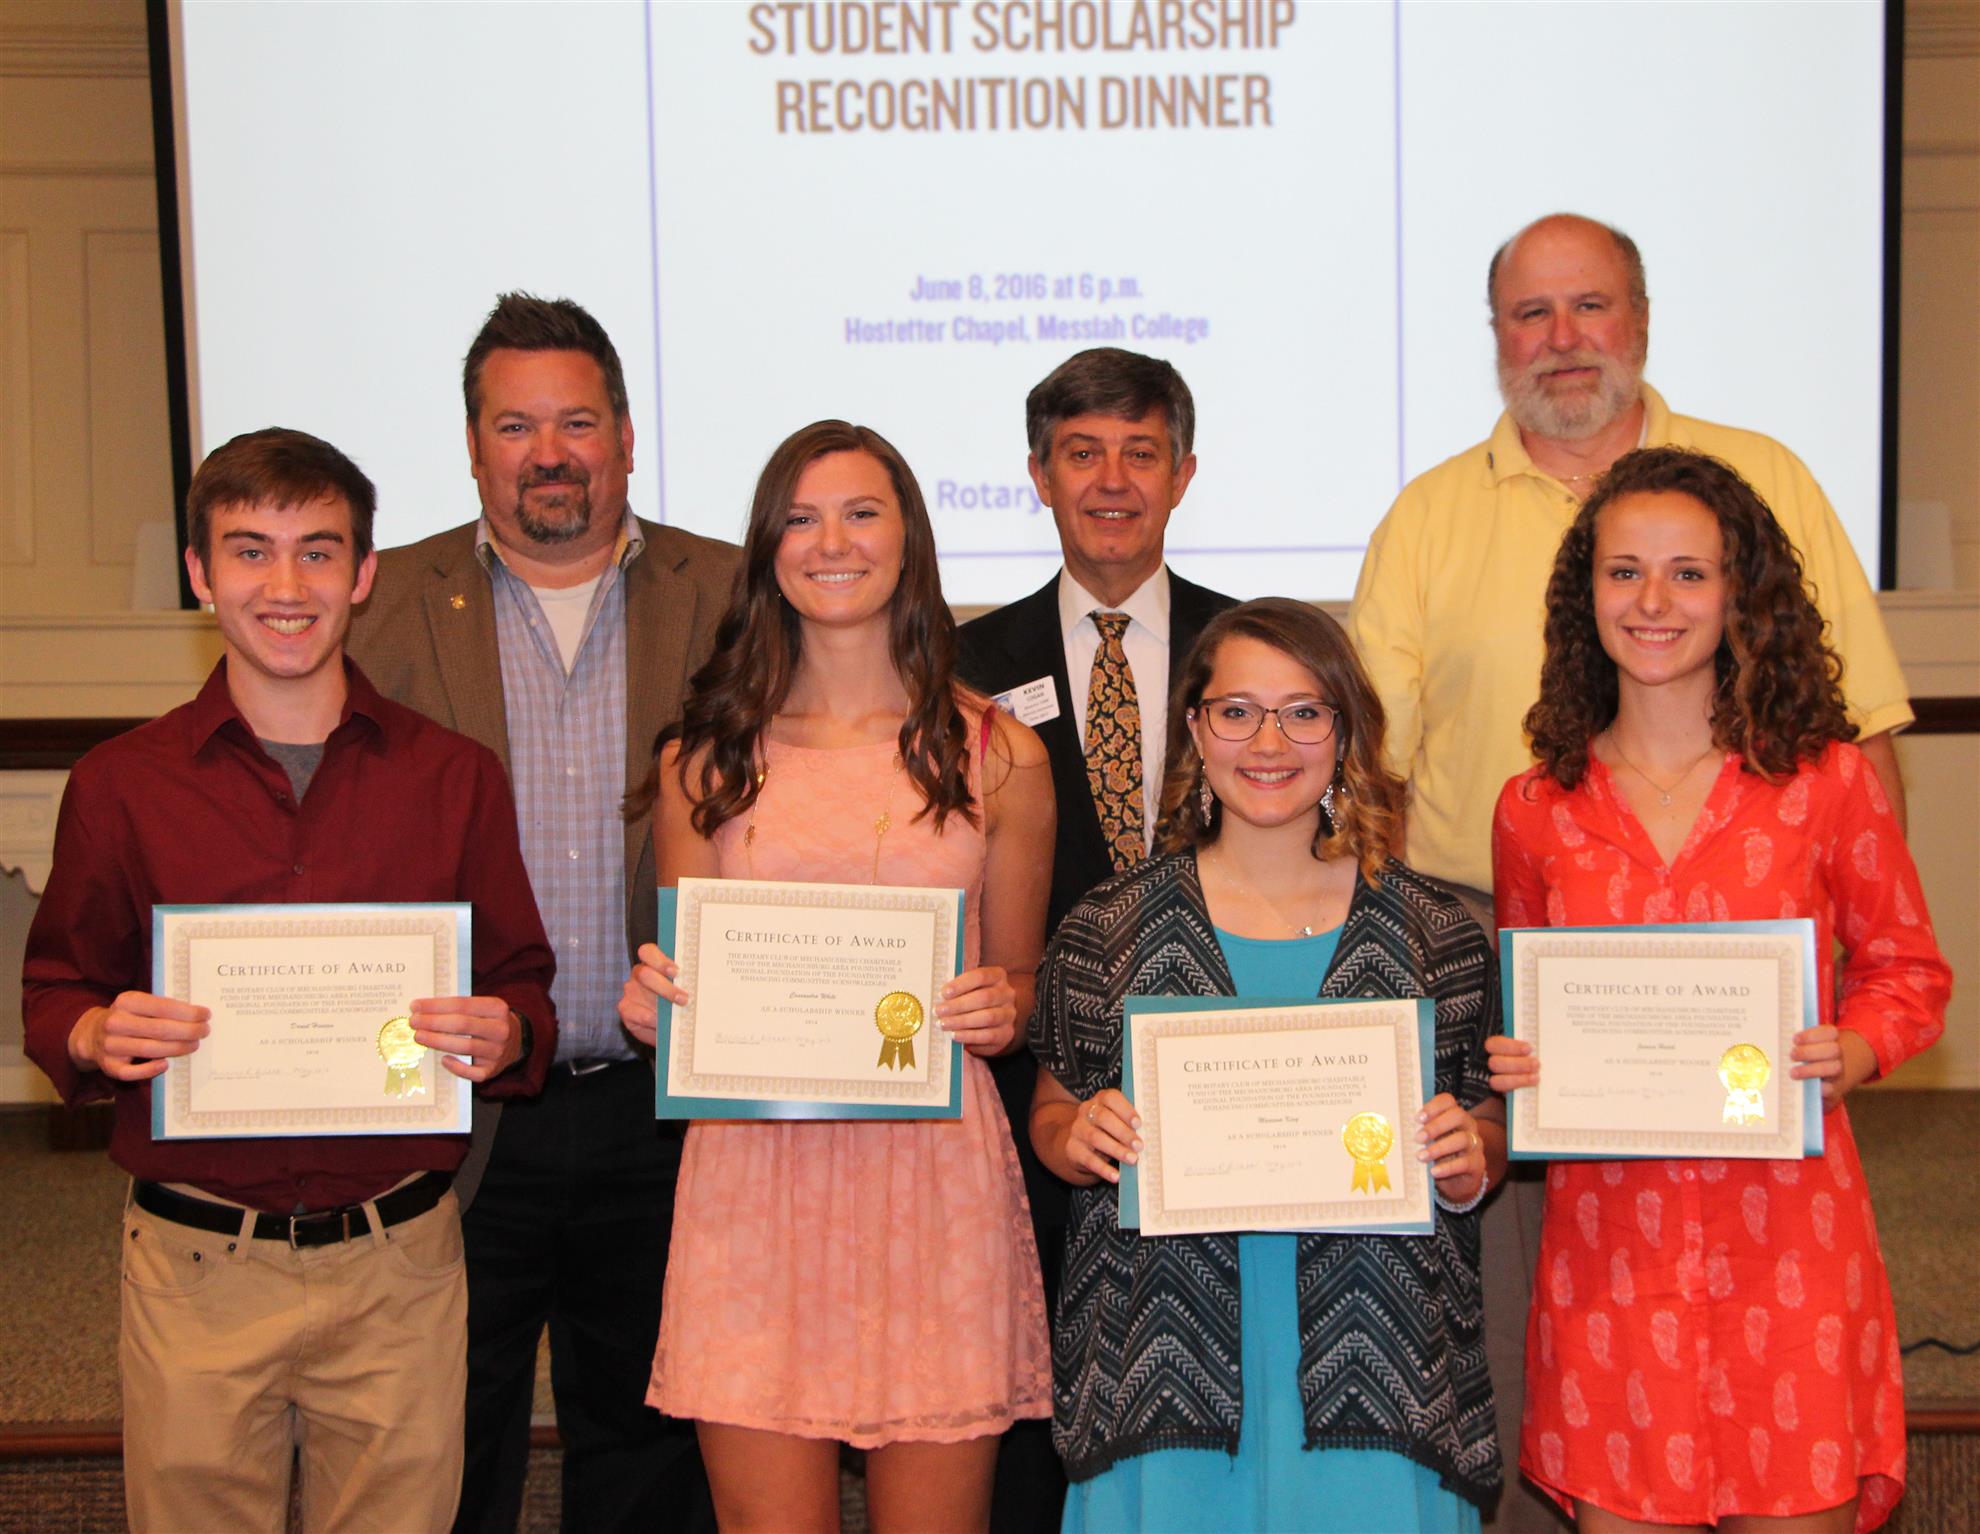 Club Awards 10,000 in Scholarships The Yellow Breeches Rotary Club